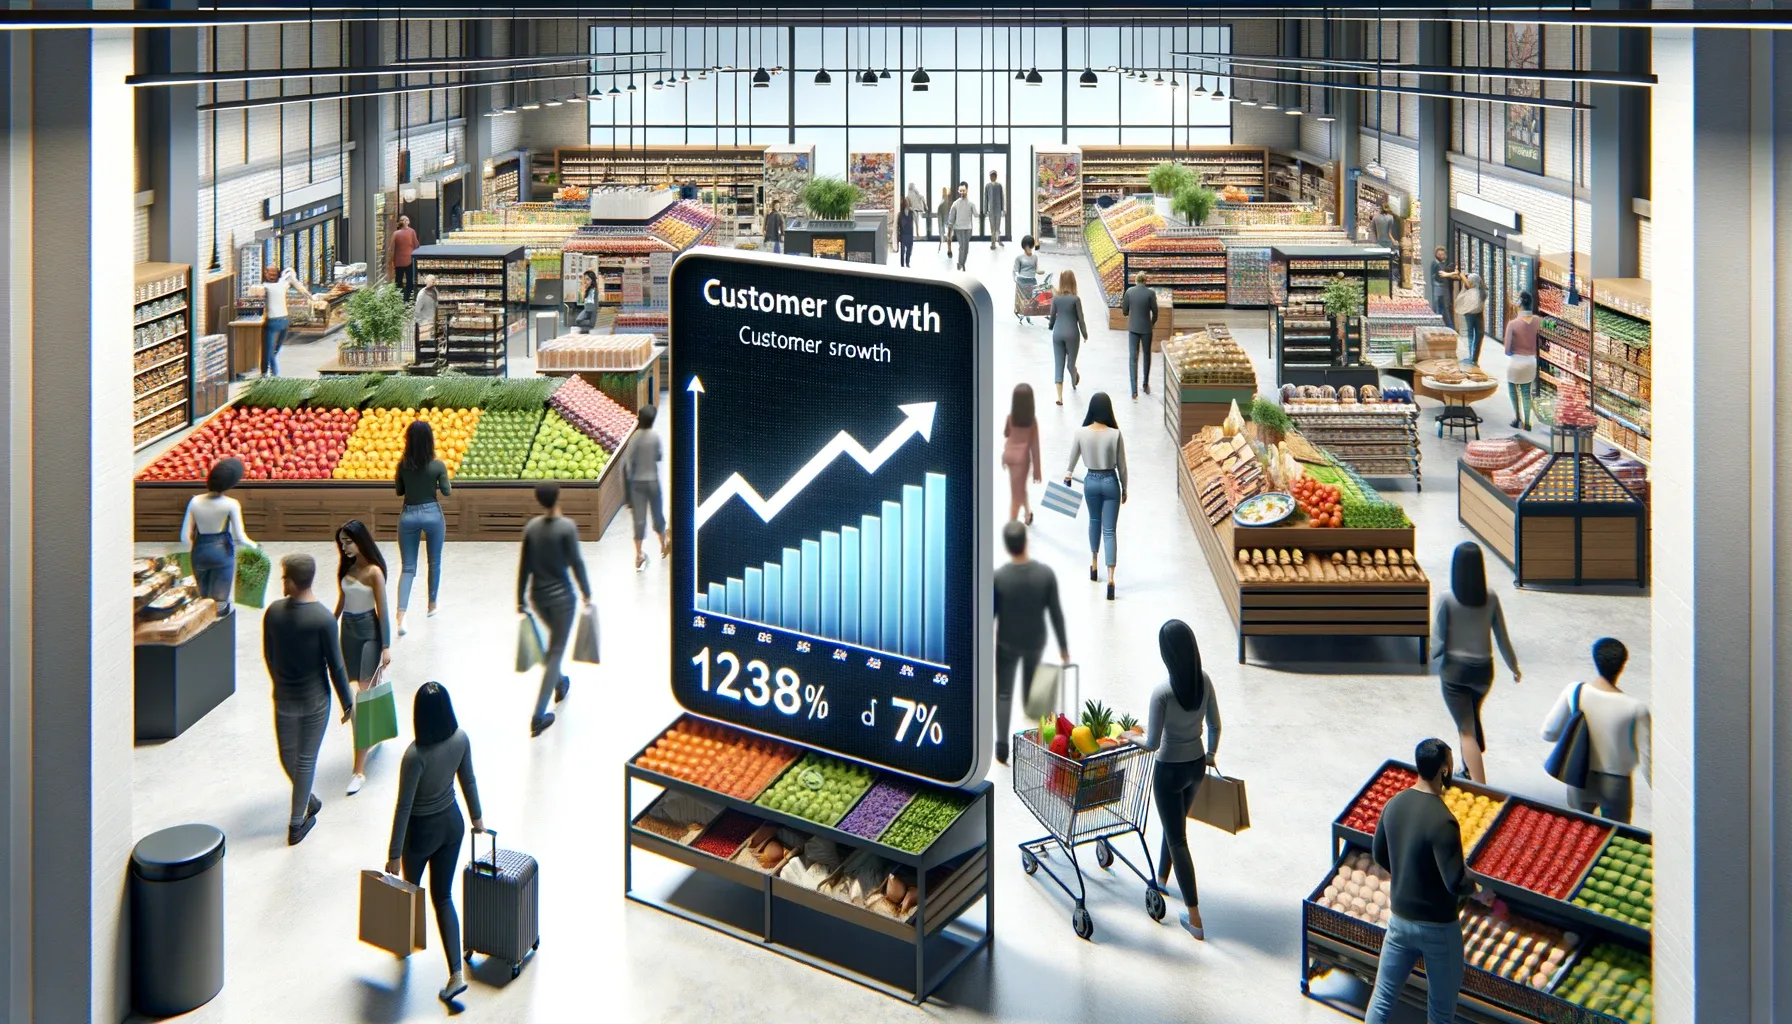 An image depicting a grocery store and a graph of customer growth